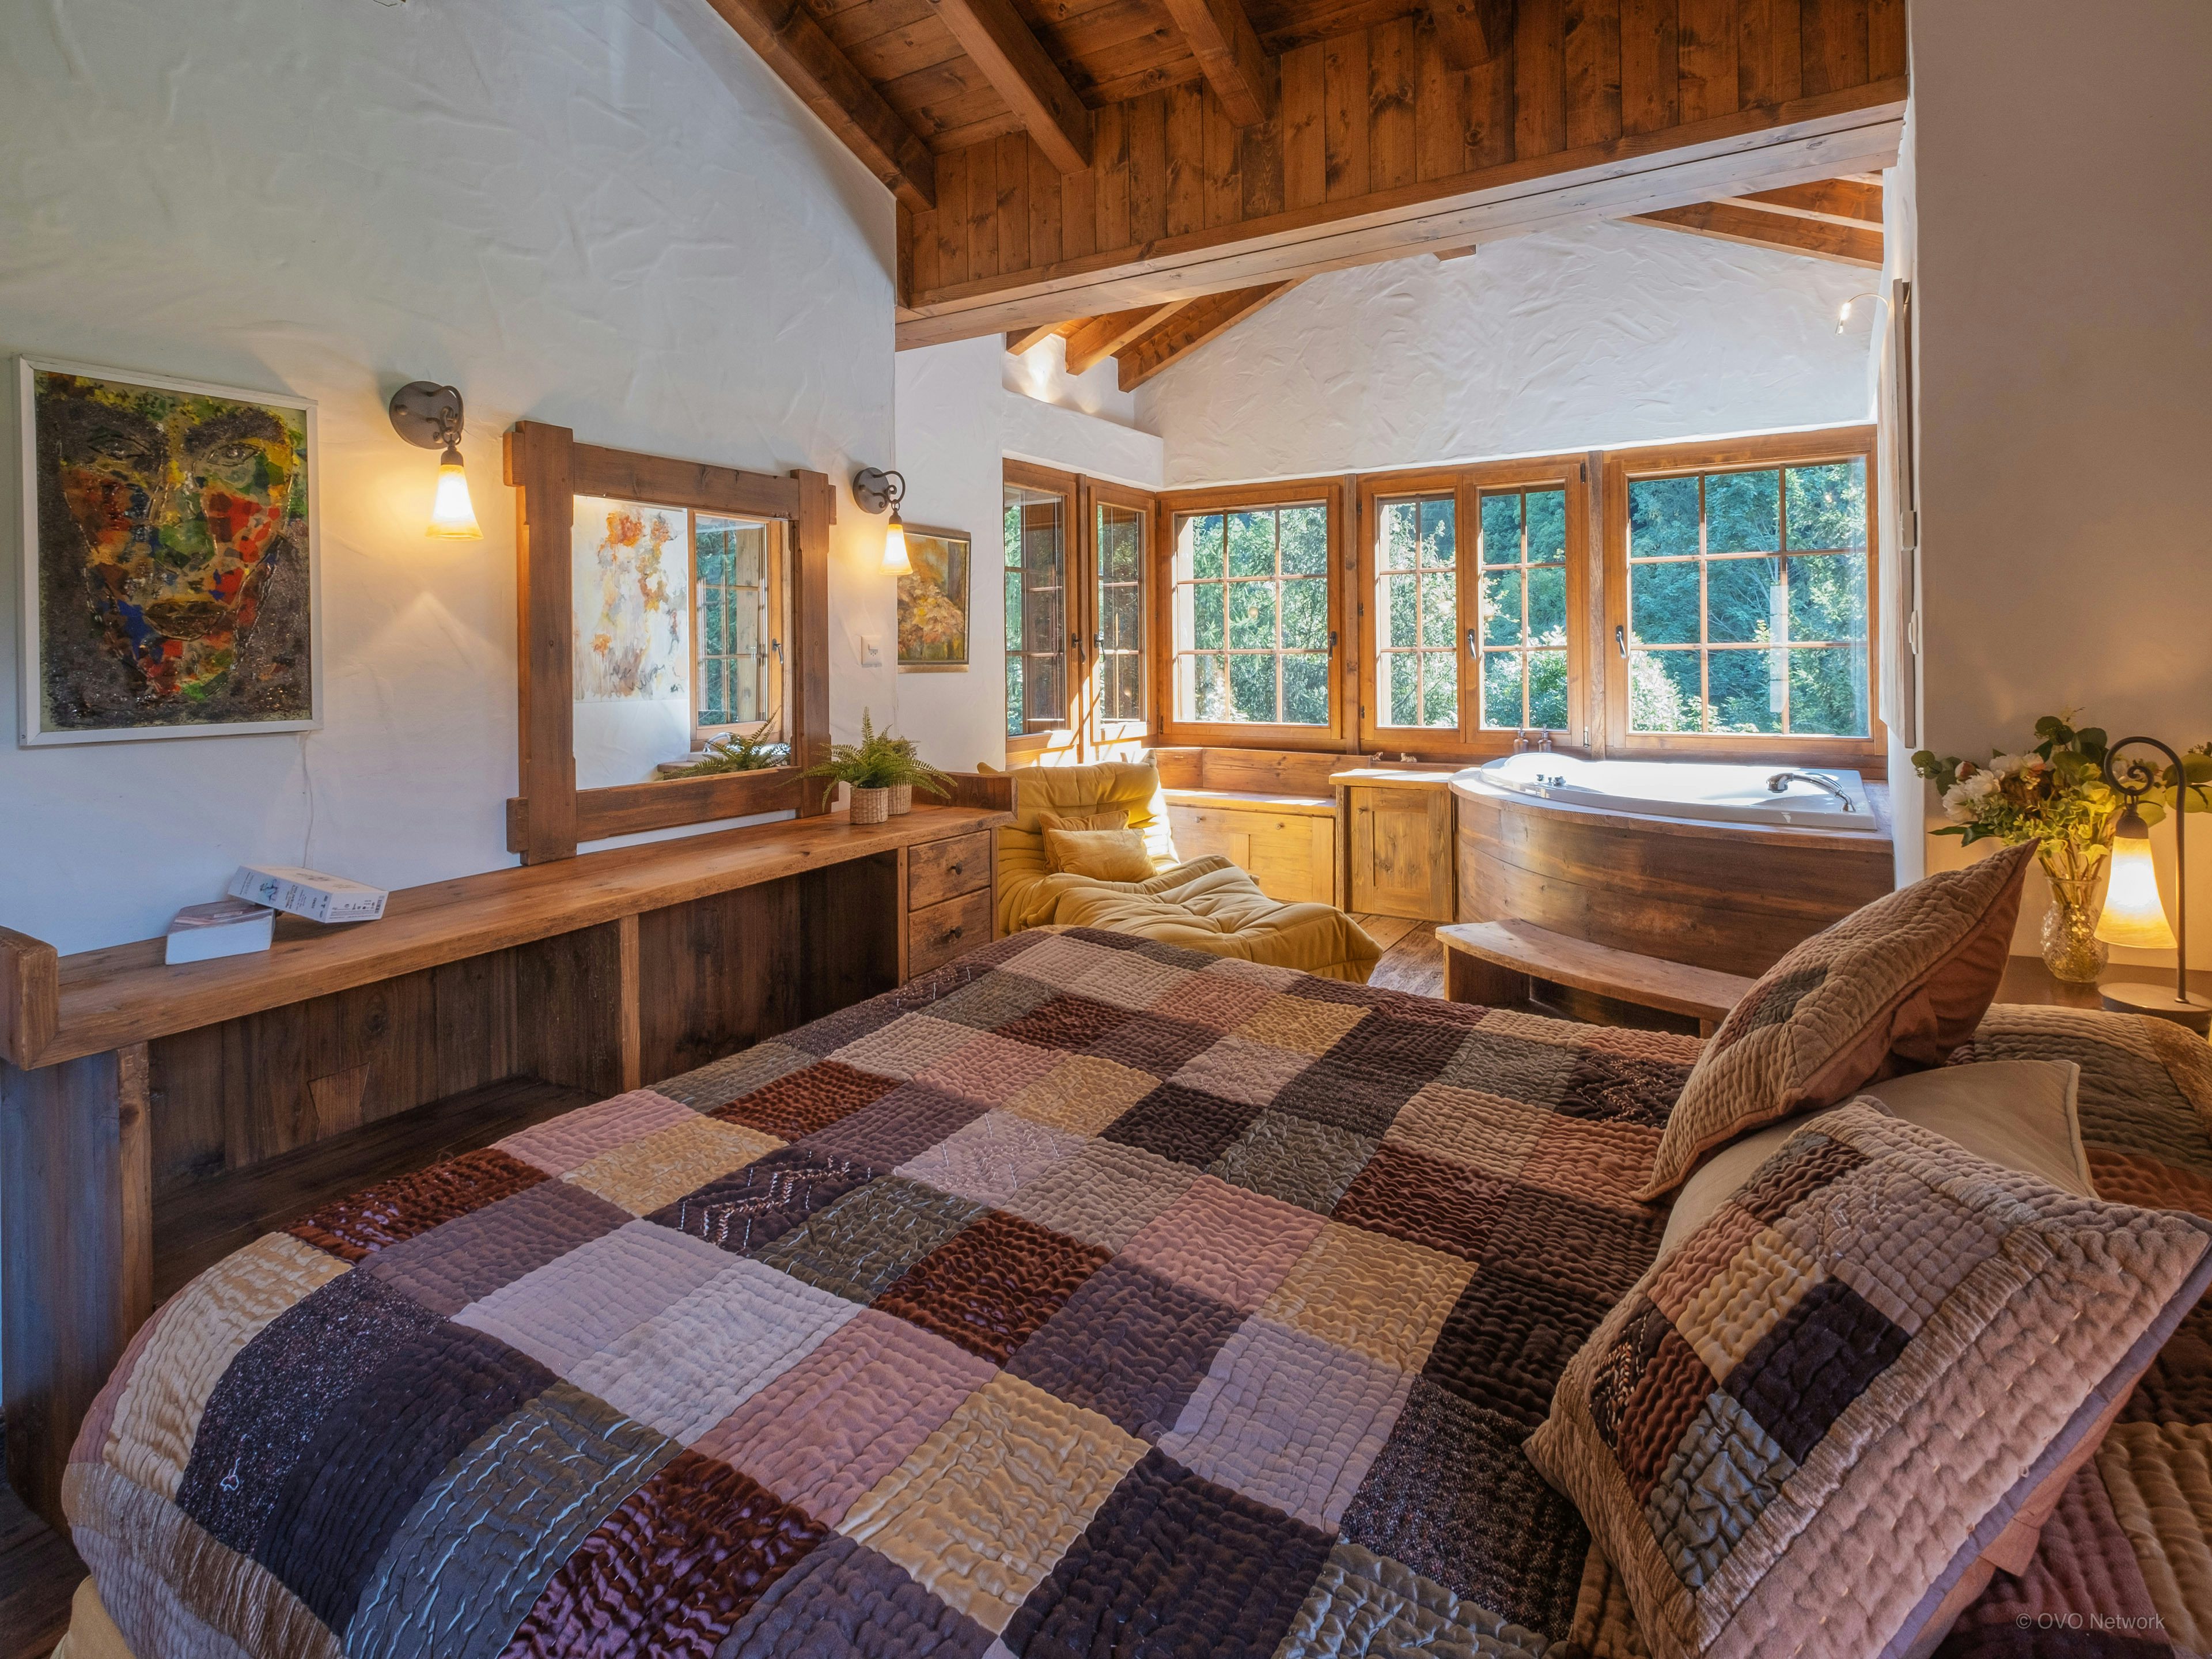 One of the bedrooms in the chalet has a double bed and a corner bath, with a view of the surrounding nature through the large windows.